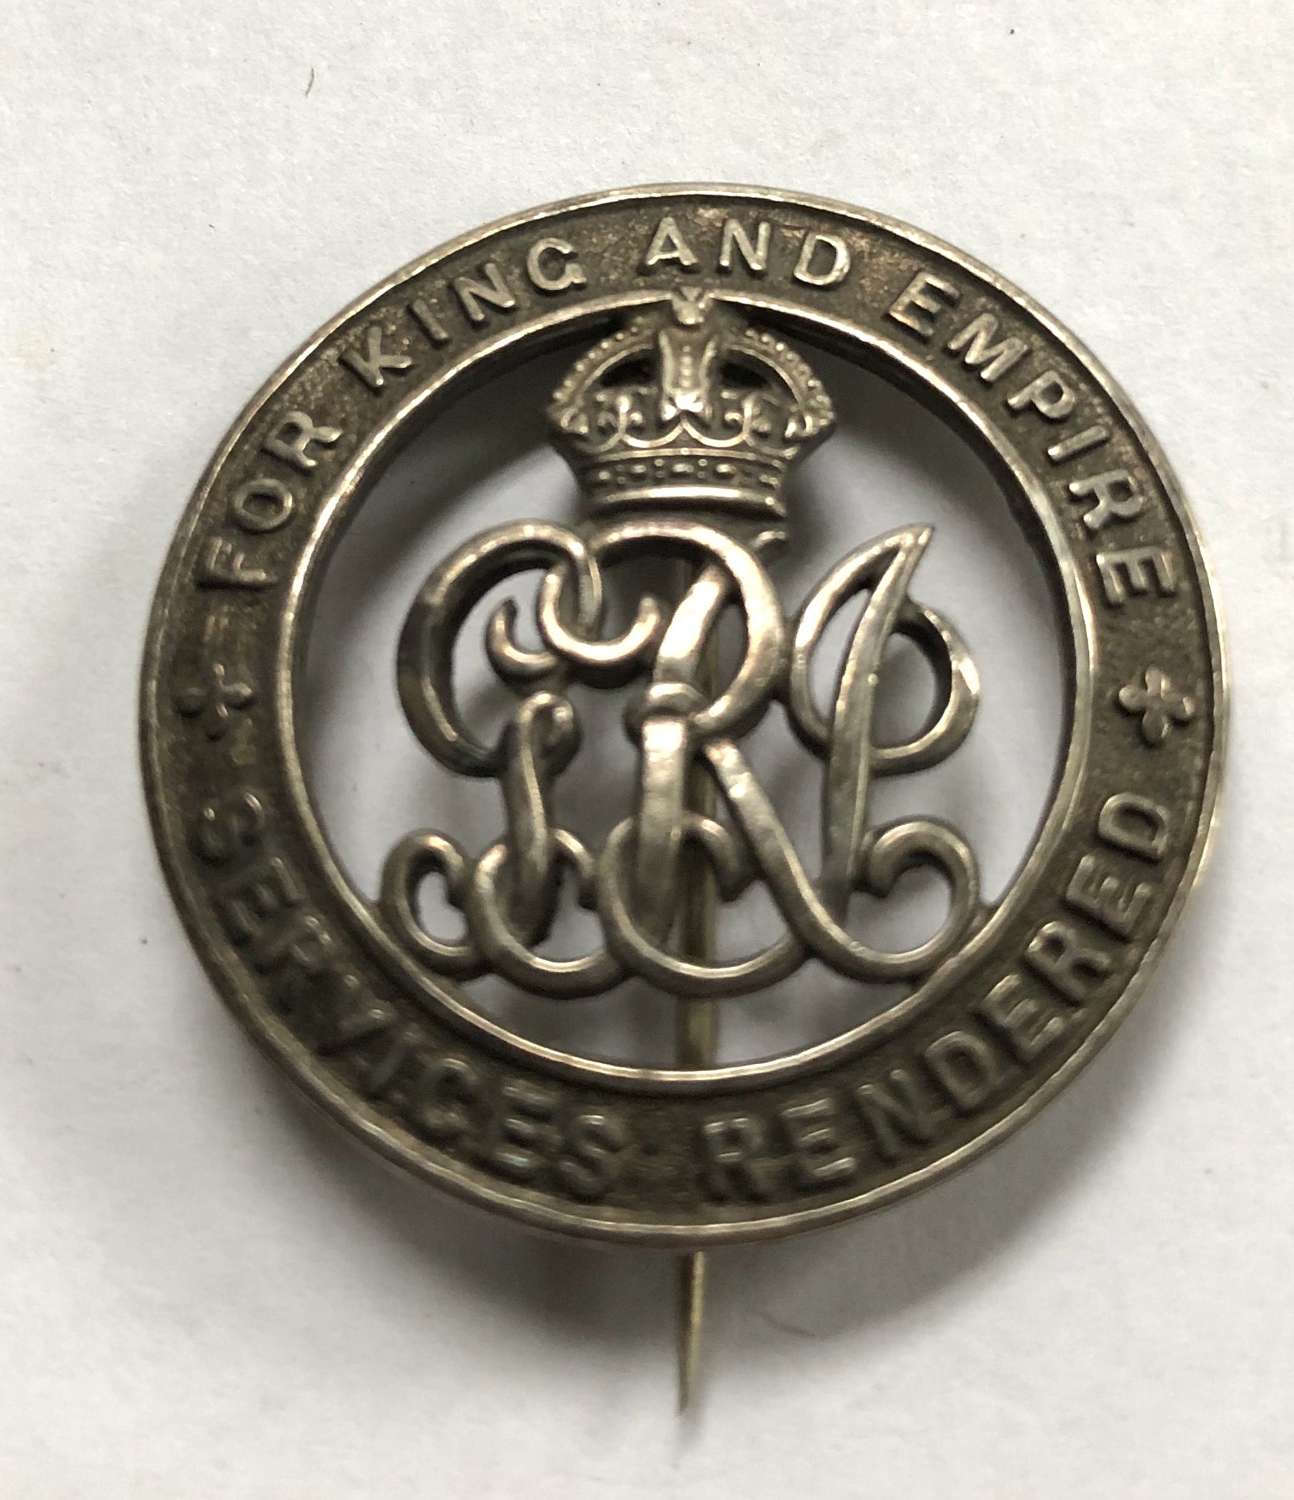 Army Service Corps then Labour Corps WW1 silver wound badge